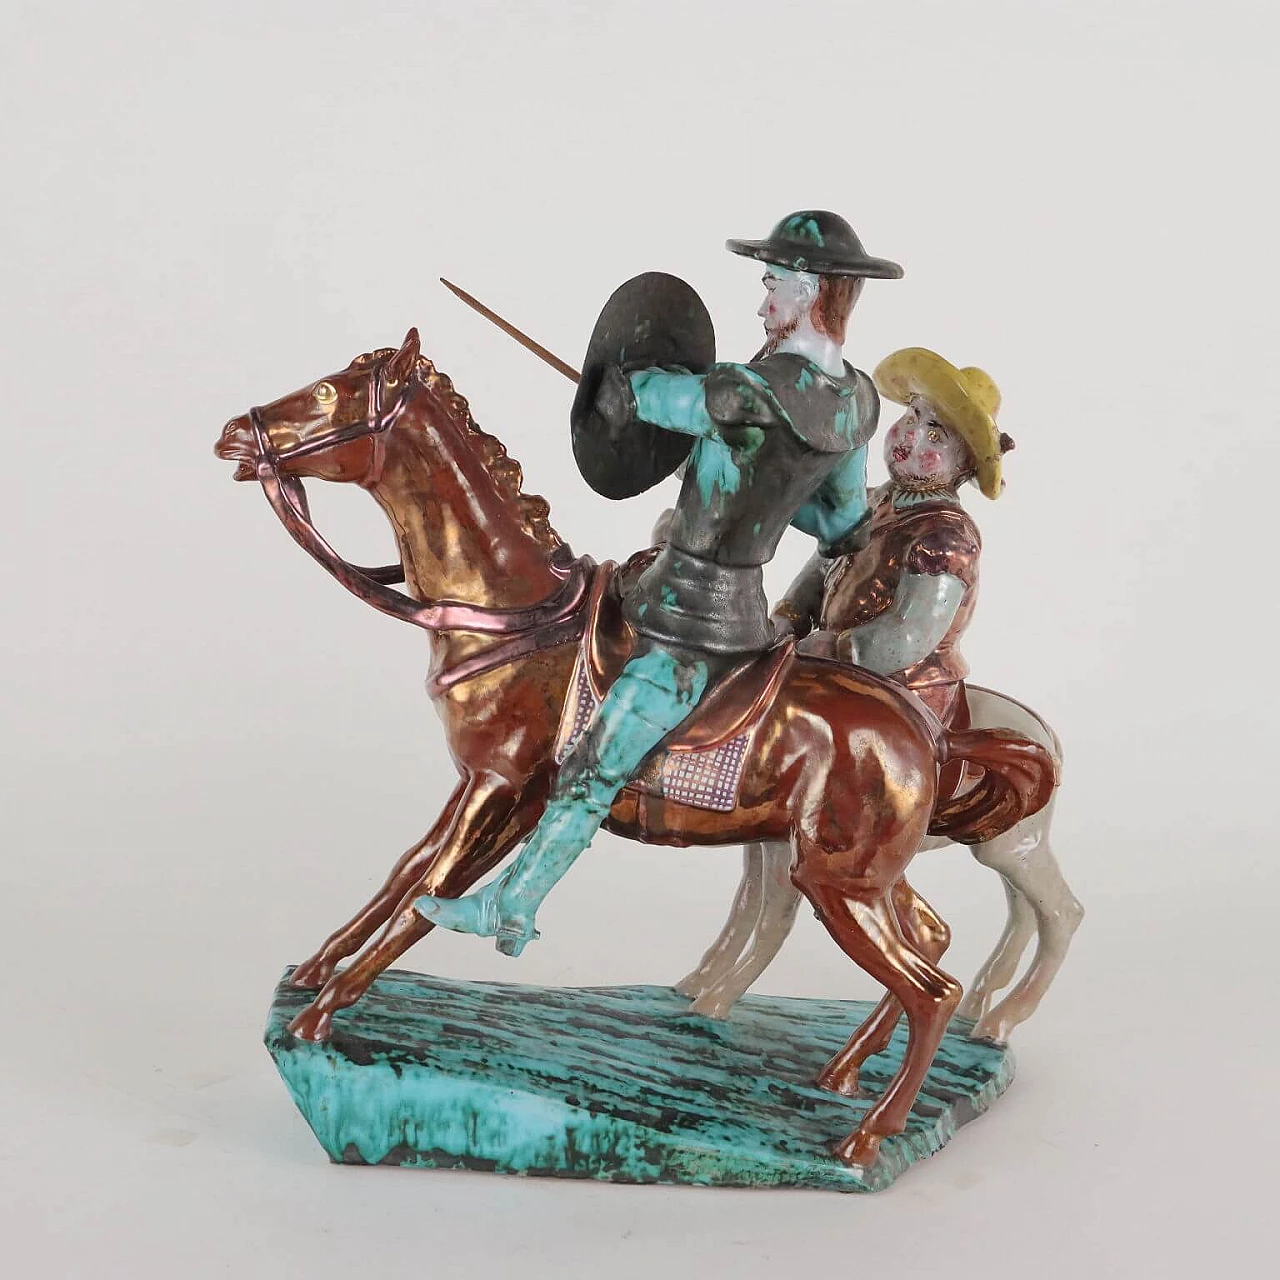 Glazed terracotta Don Quixote and Sancho Panza sculpture by Trevir 14